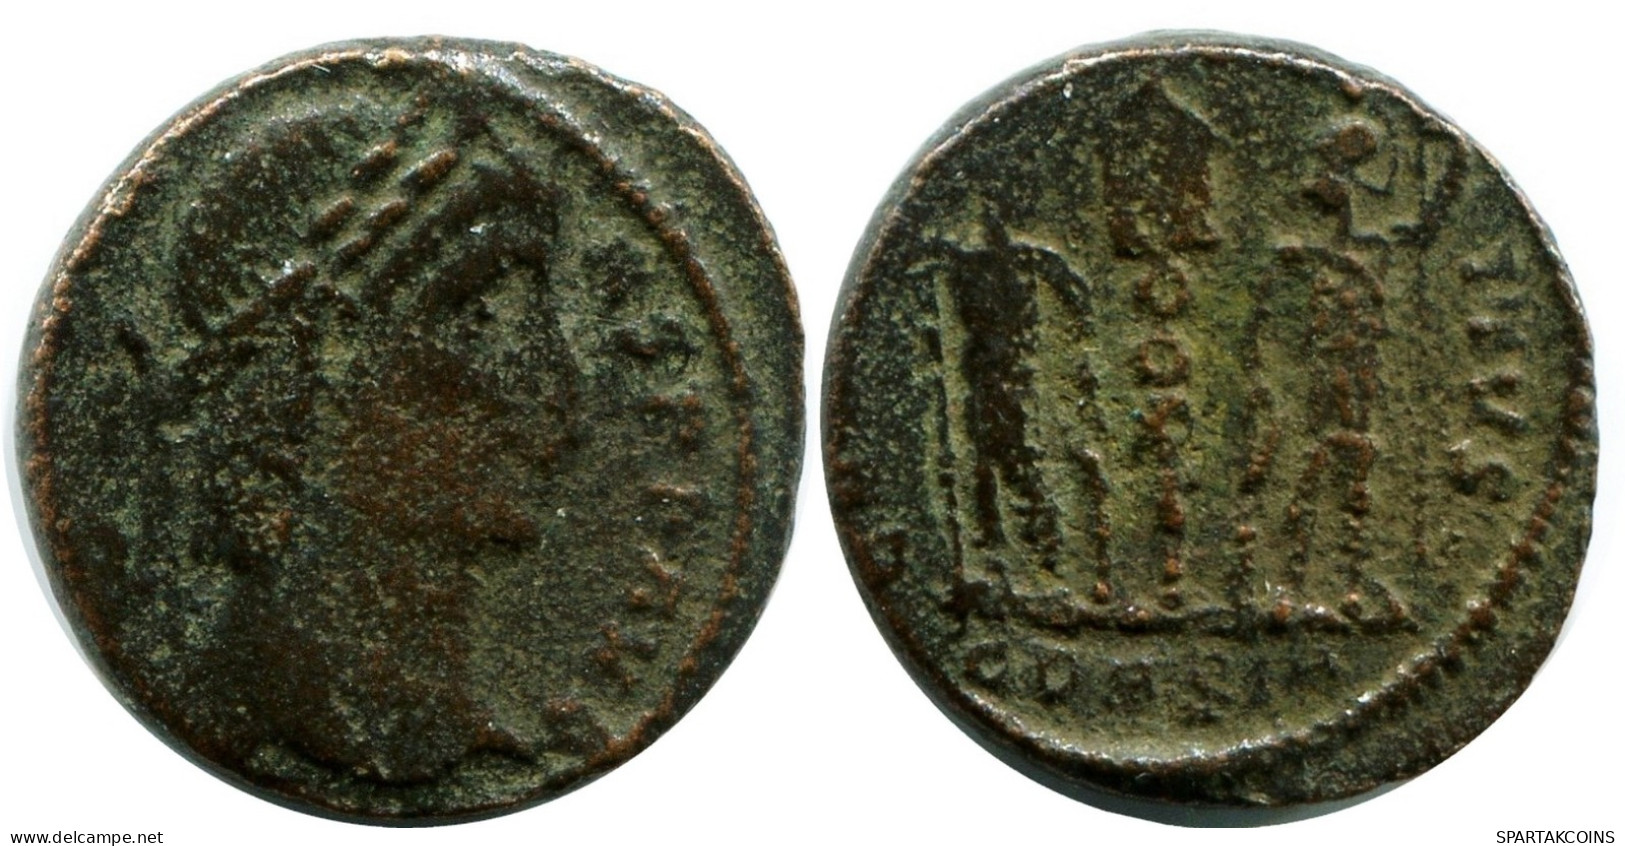 CONSTANS MINTED IN CONSTANTINOPLE FOUND IN IHNASYAH HOARD EGYPT #ANC11946.14.E.A - El Imperio Christiano (307 / 363)